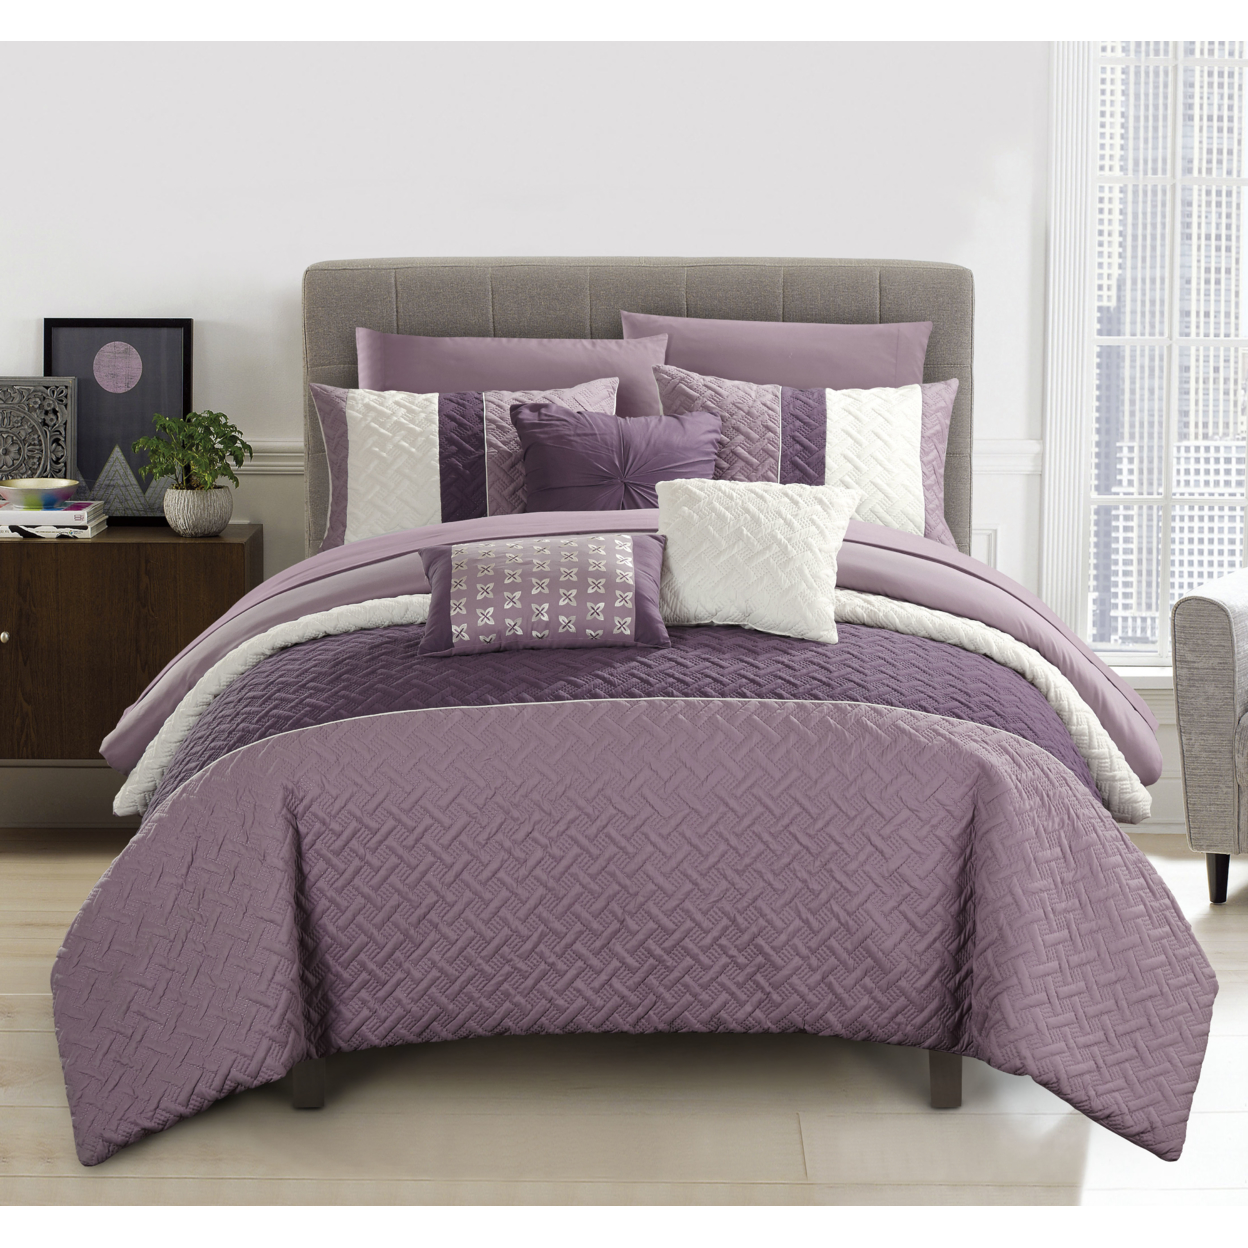 Chic Home Shaila 10 Or 8 Piece Comforter Set Color Block Quilted Embroidered Design Bed In A Bag Bedding - Plum, Queen